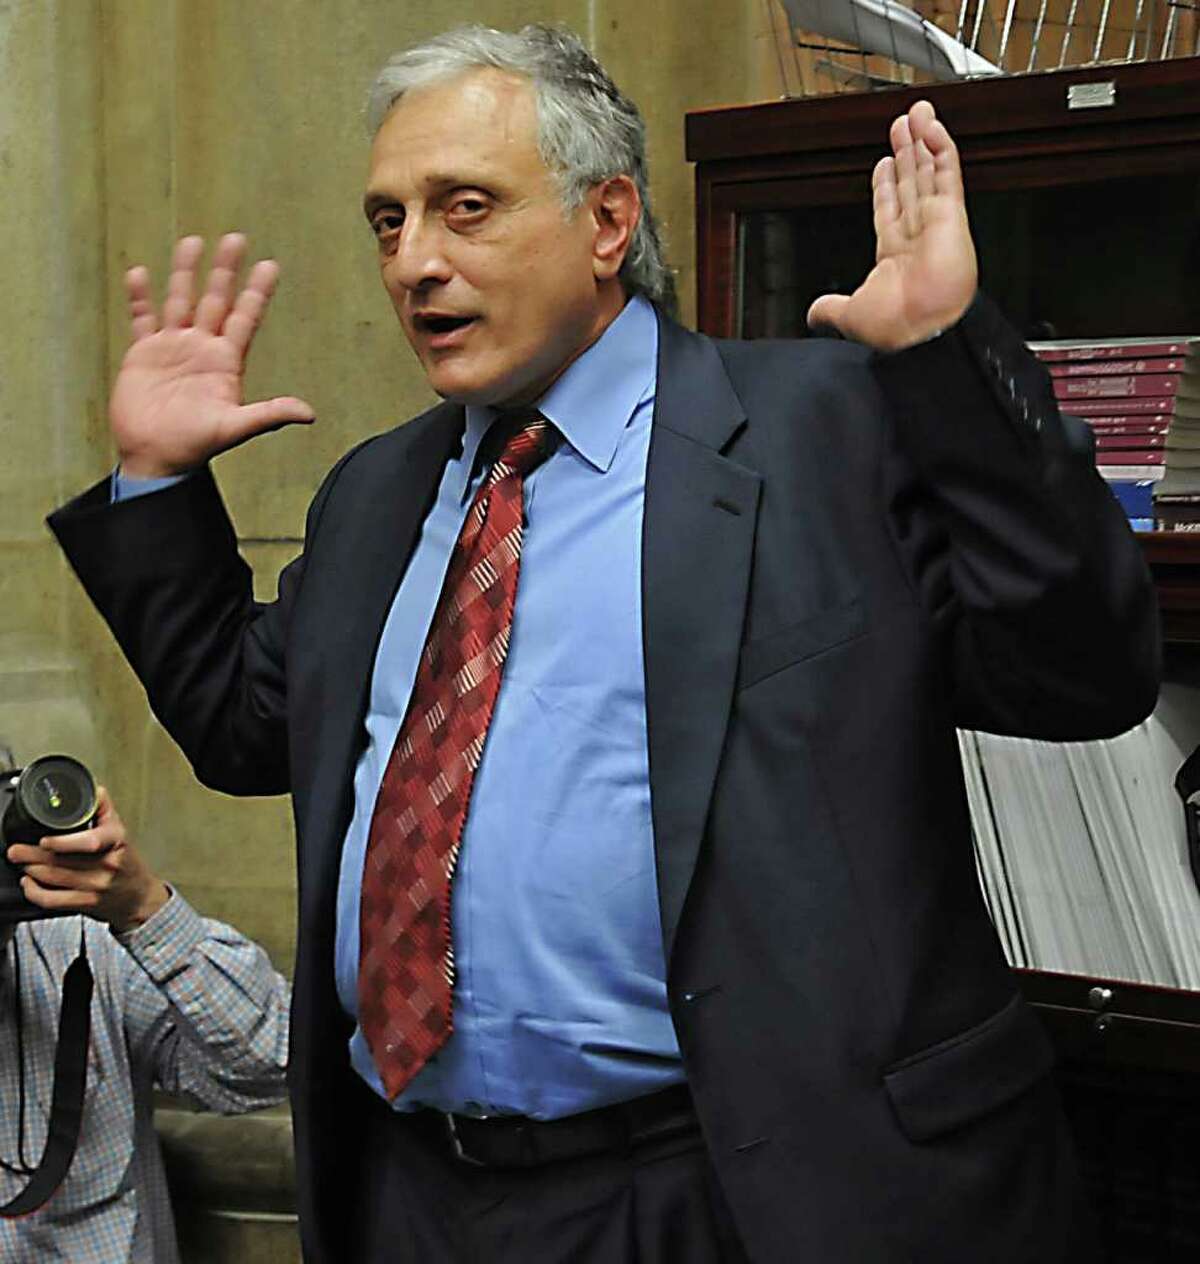 Gubernatorial candidate Carl Paladino speaks to the press in the Capitol in in Albany, NY on April 6, 2010. (Lori Van Buren / Times Union)